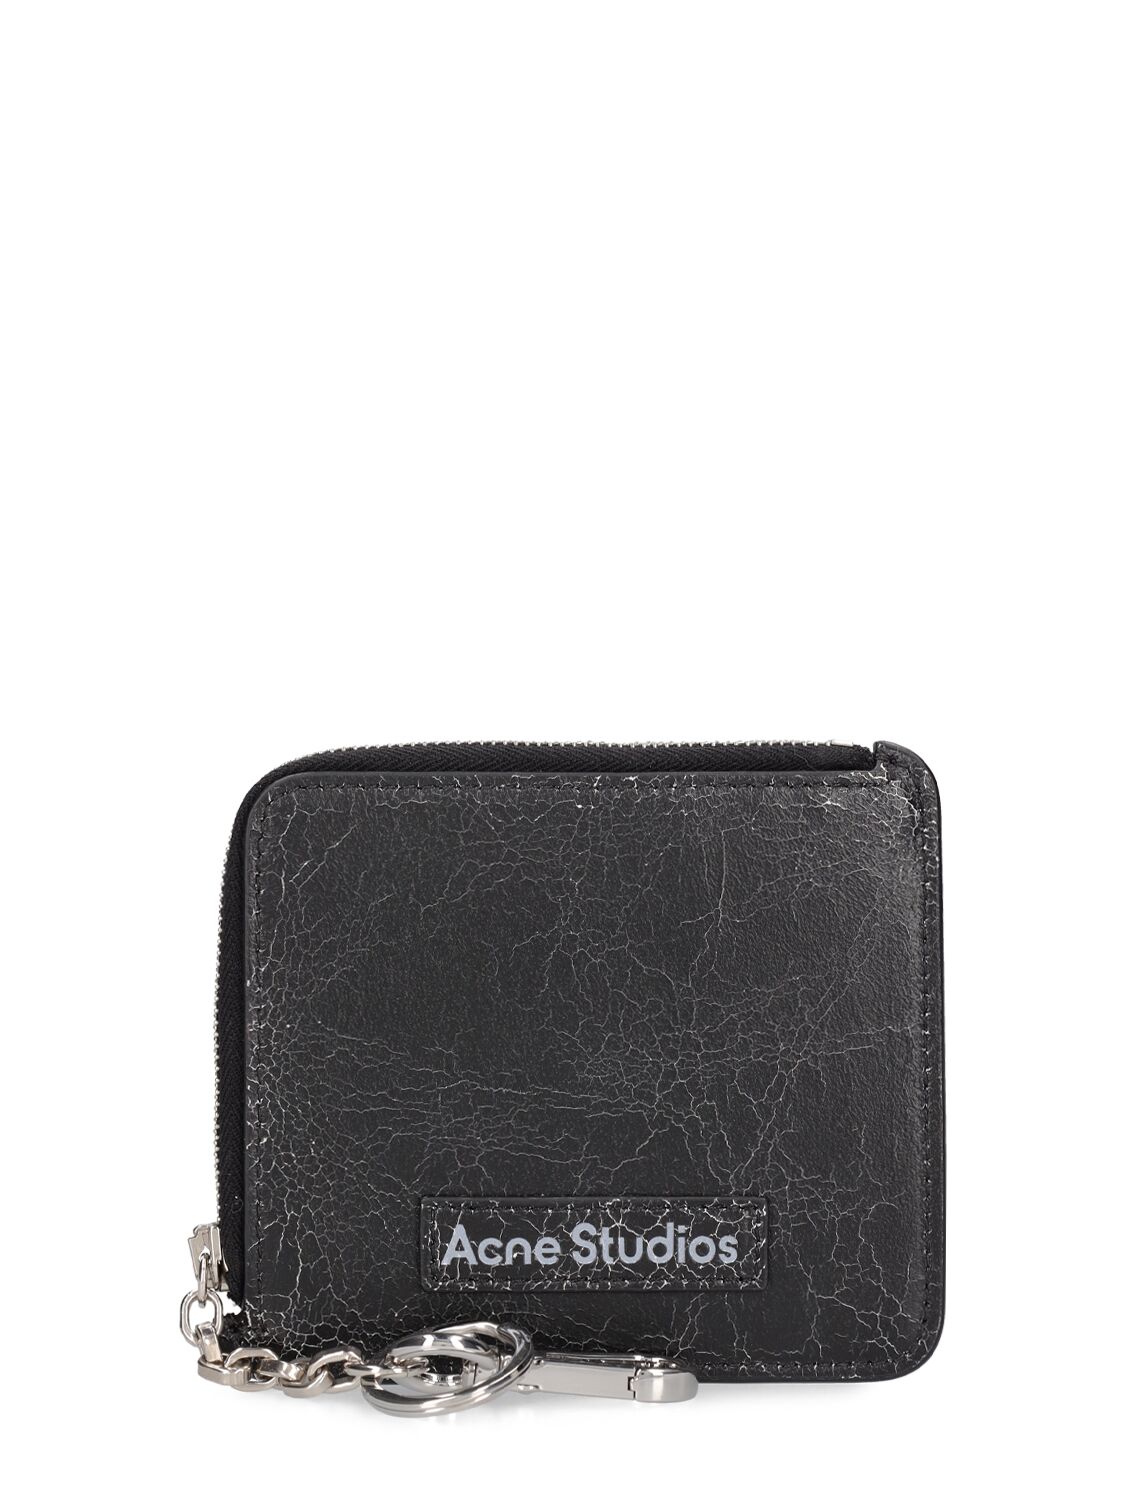 Aquare Leather Zip Coin Purse